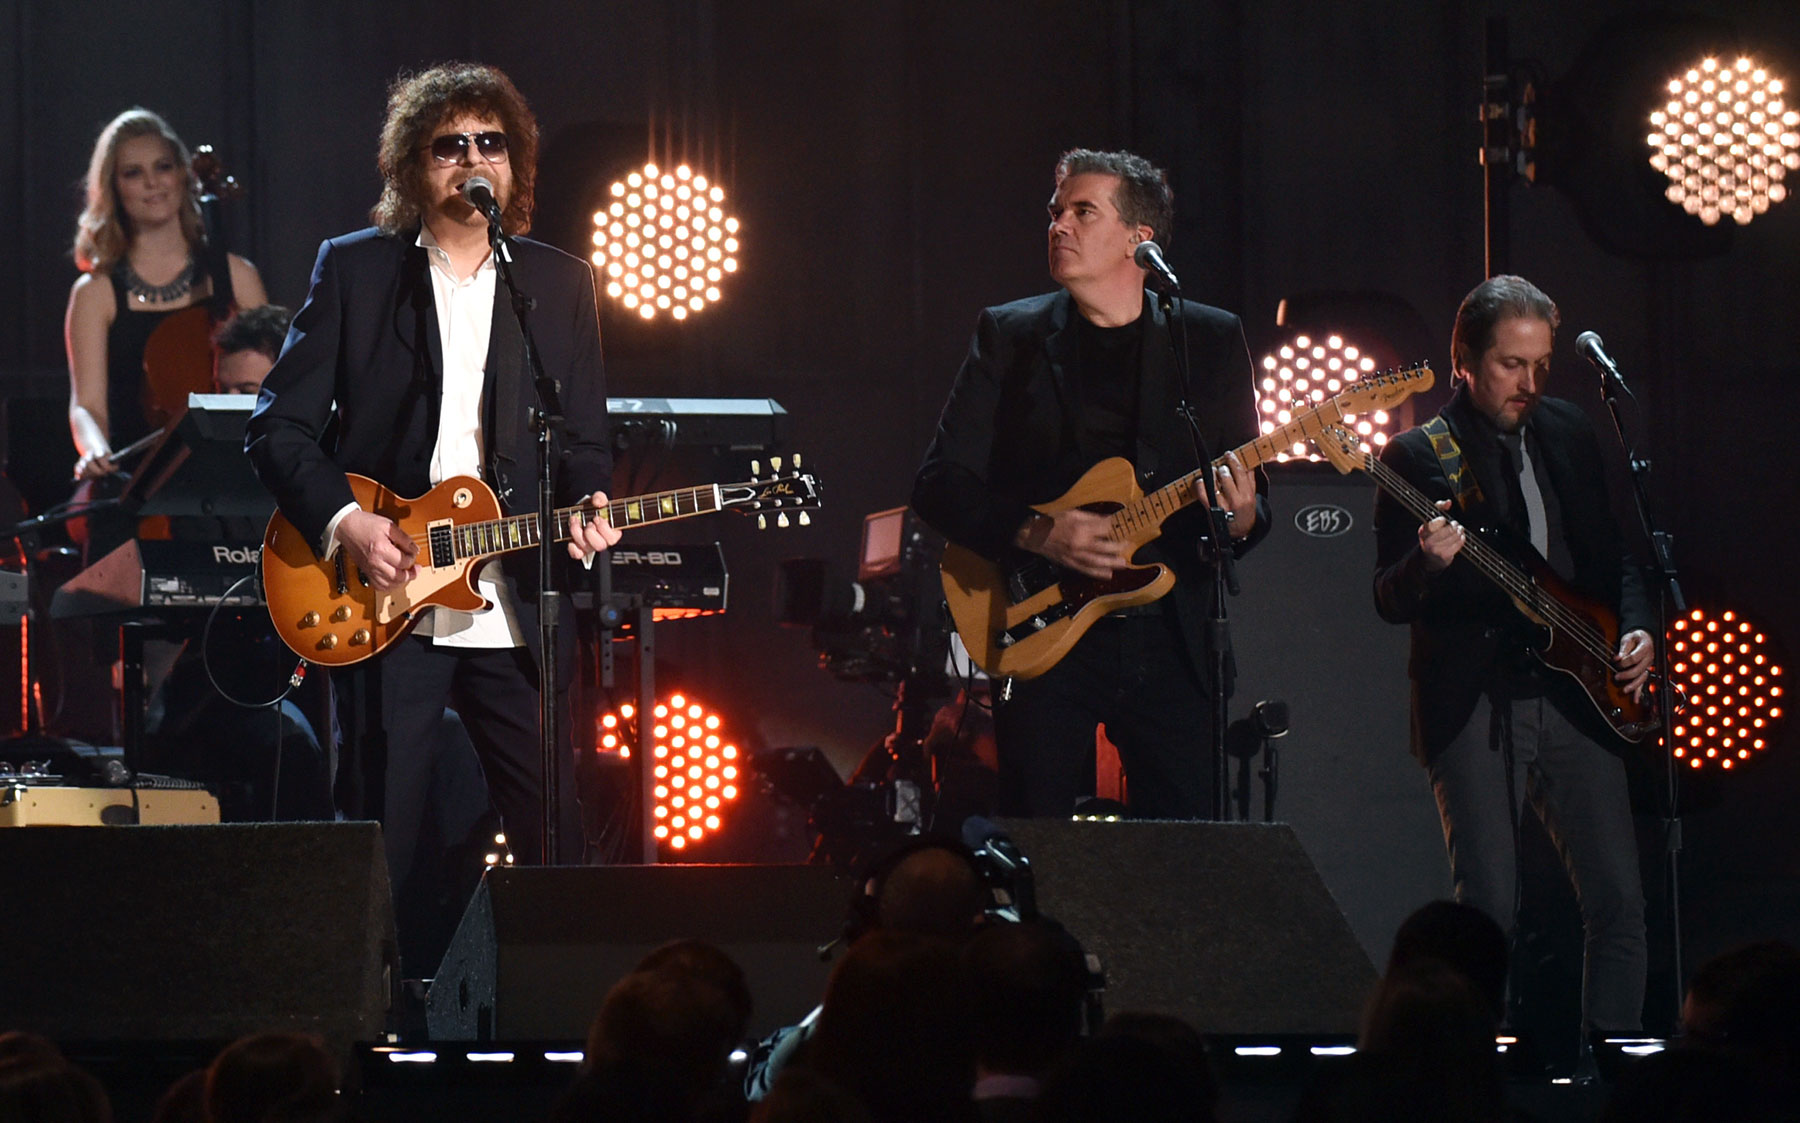 

Jeff Lynne, left, and the Electric Light Orchestra perform at the 57th annual Grammy Awards on Sunday, Feb. 8, 2015, in Los Angeles. (Photo by John Shearer/Invision/AP)